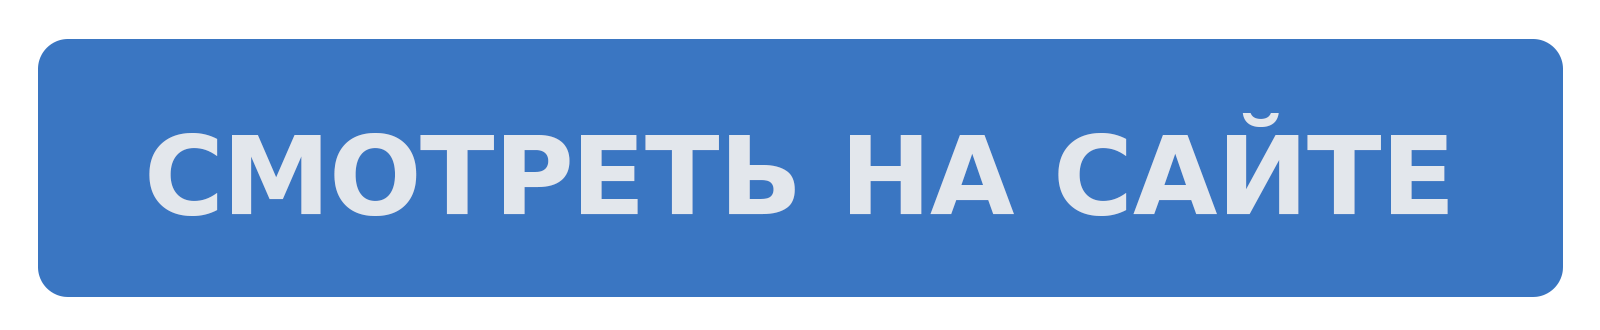 снс.png